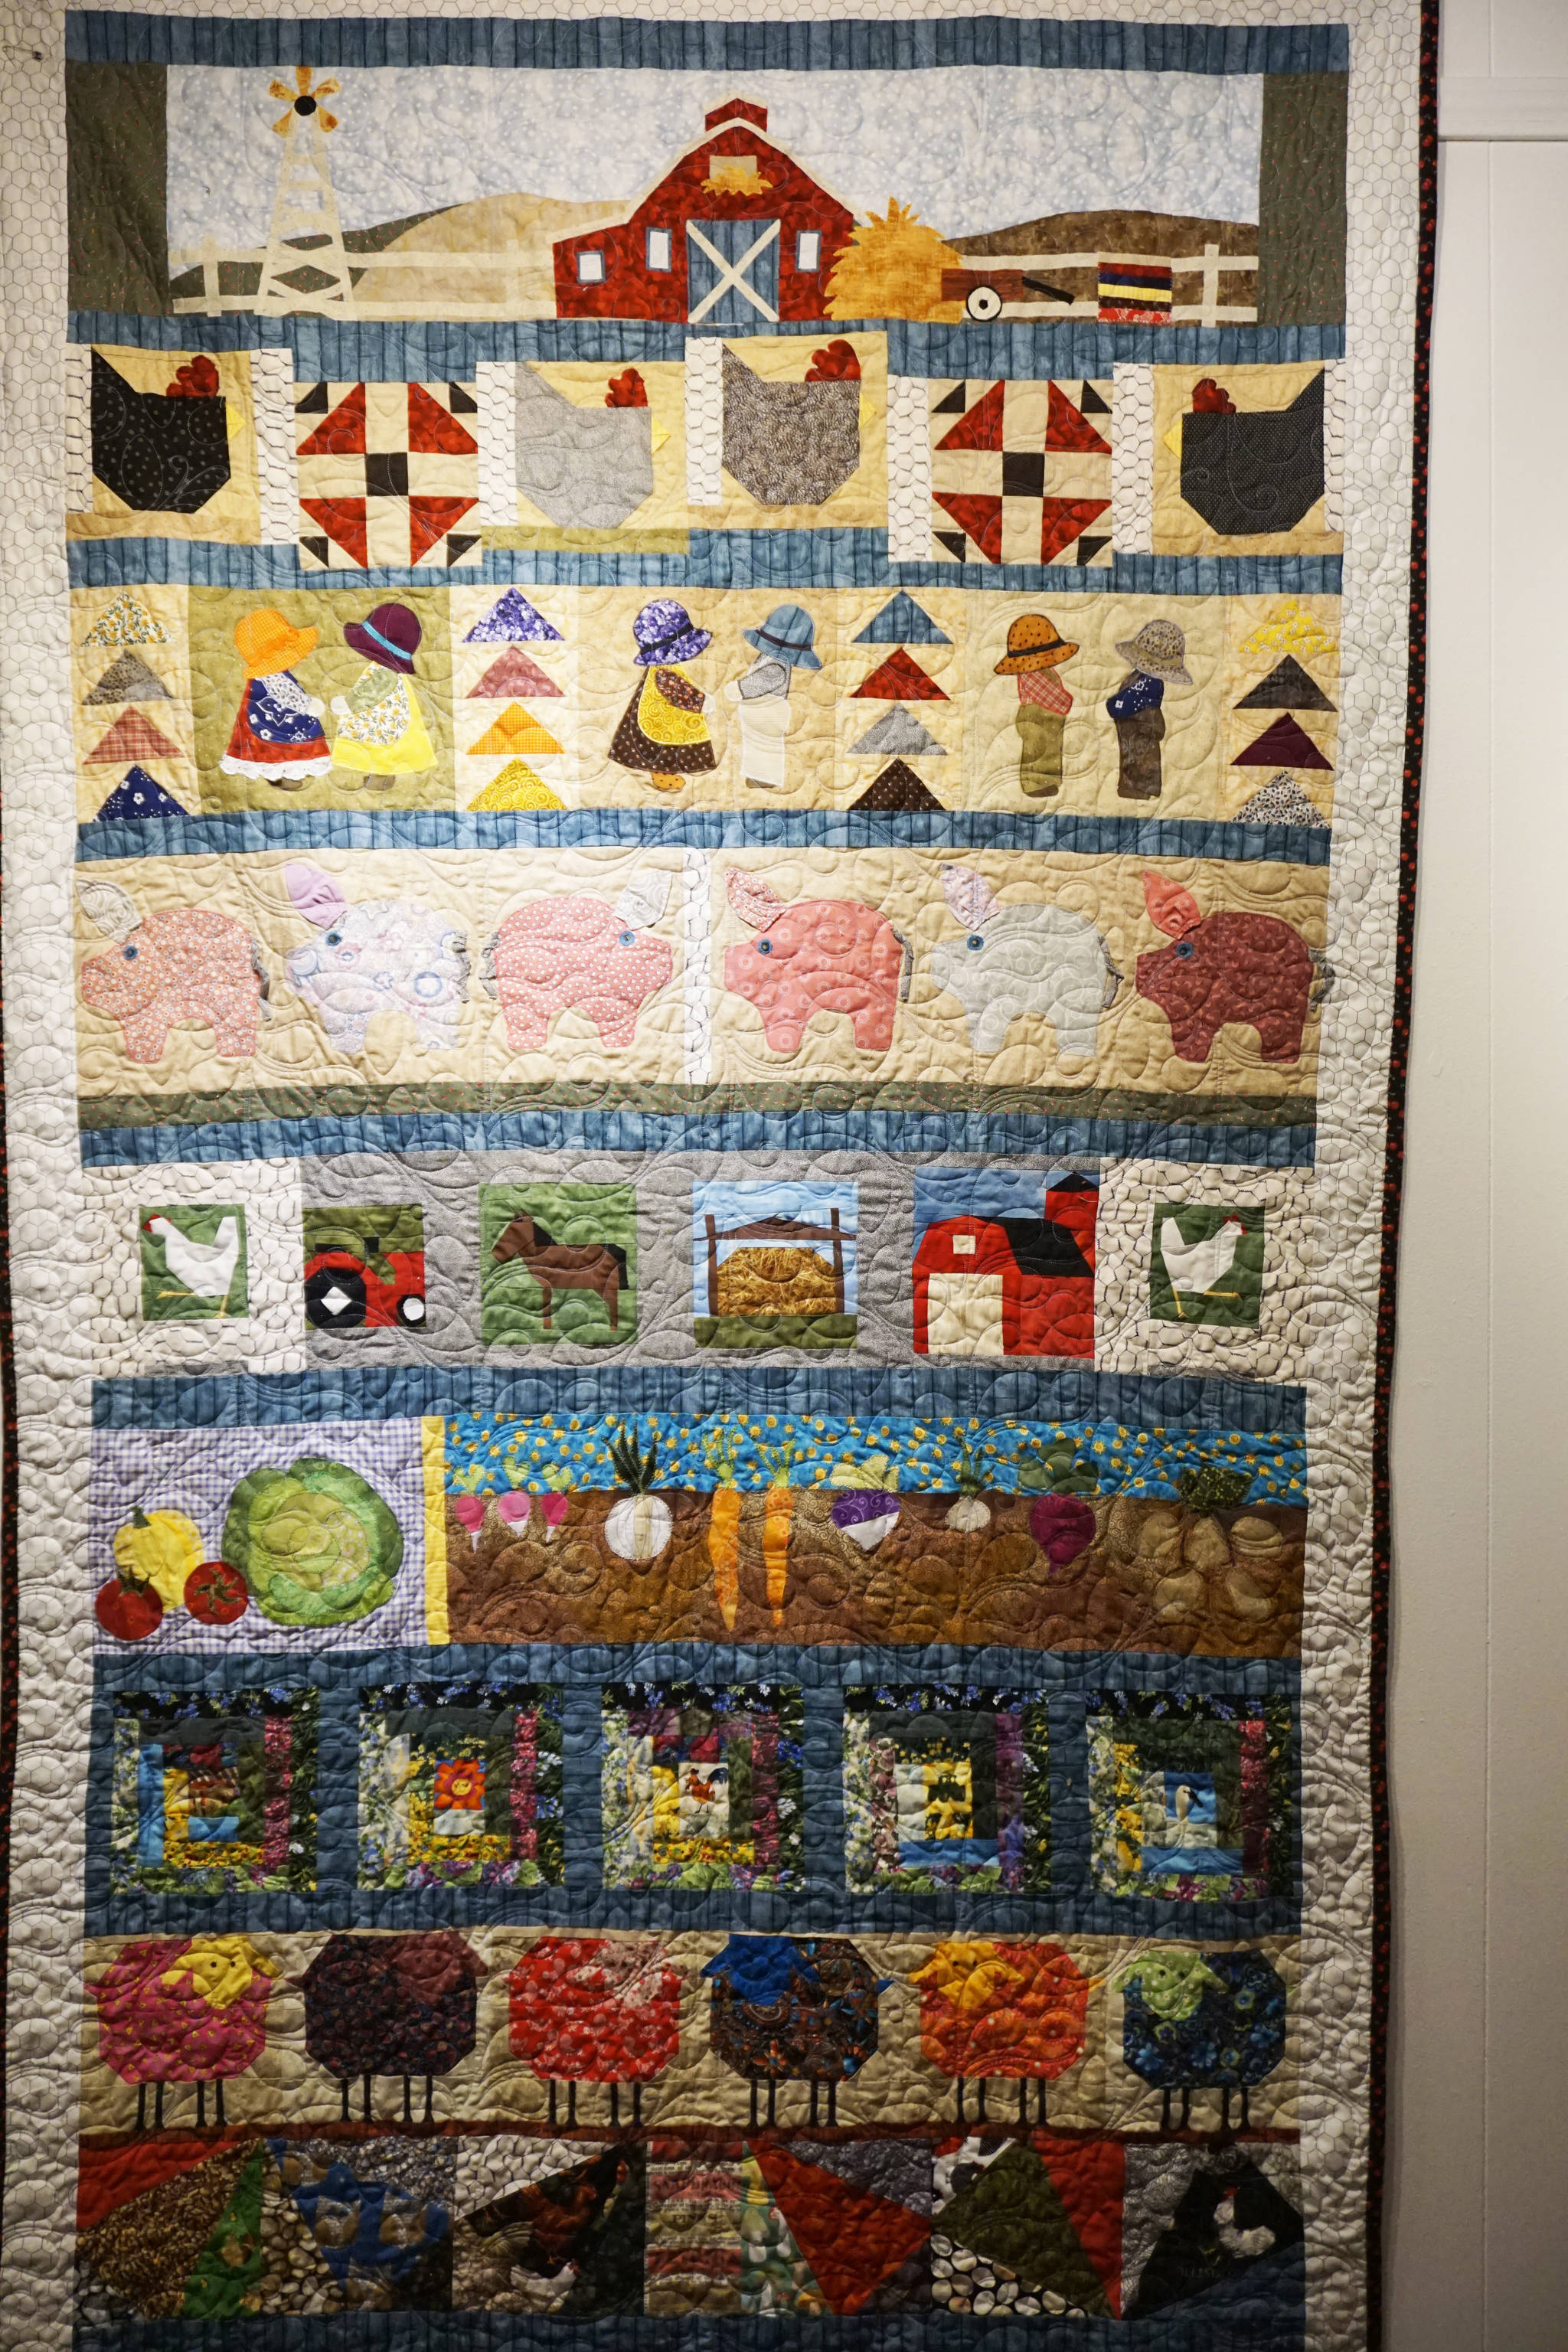 Karol Miller’s “Down on the Farm” quilt, one of the works in the “9 Women / 9 Quilts” show that opened last Friday, Feb. 1, 2019, at the Homer Council on the Arts, in Homer, Alaska. (Photo by Michael Armstrong/Homer News)